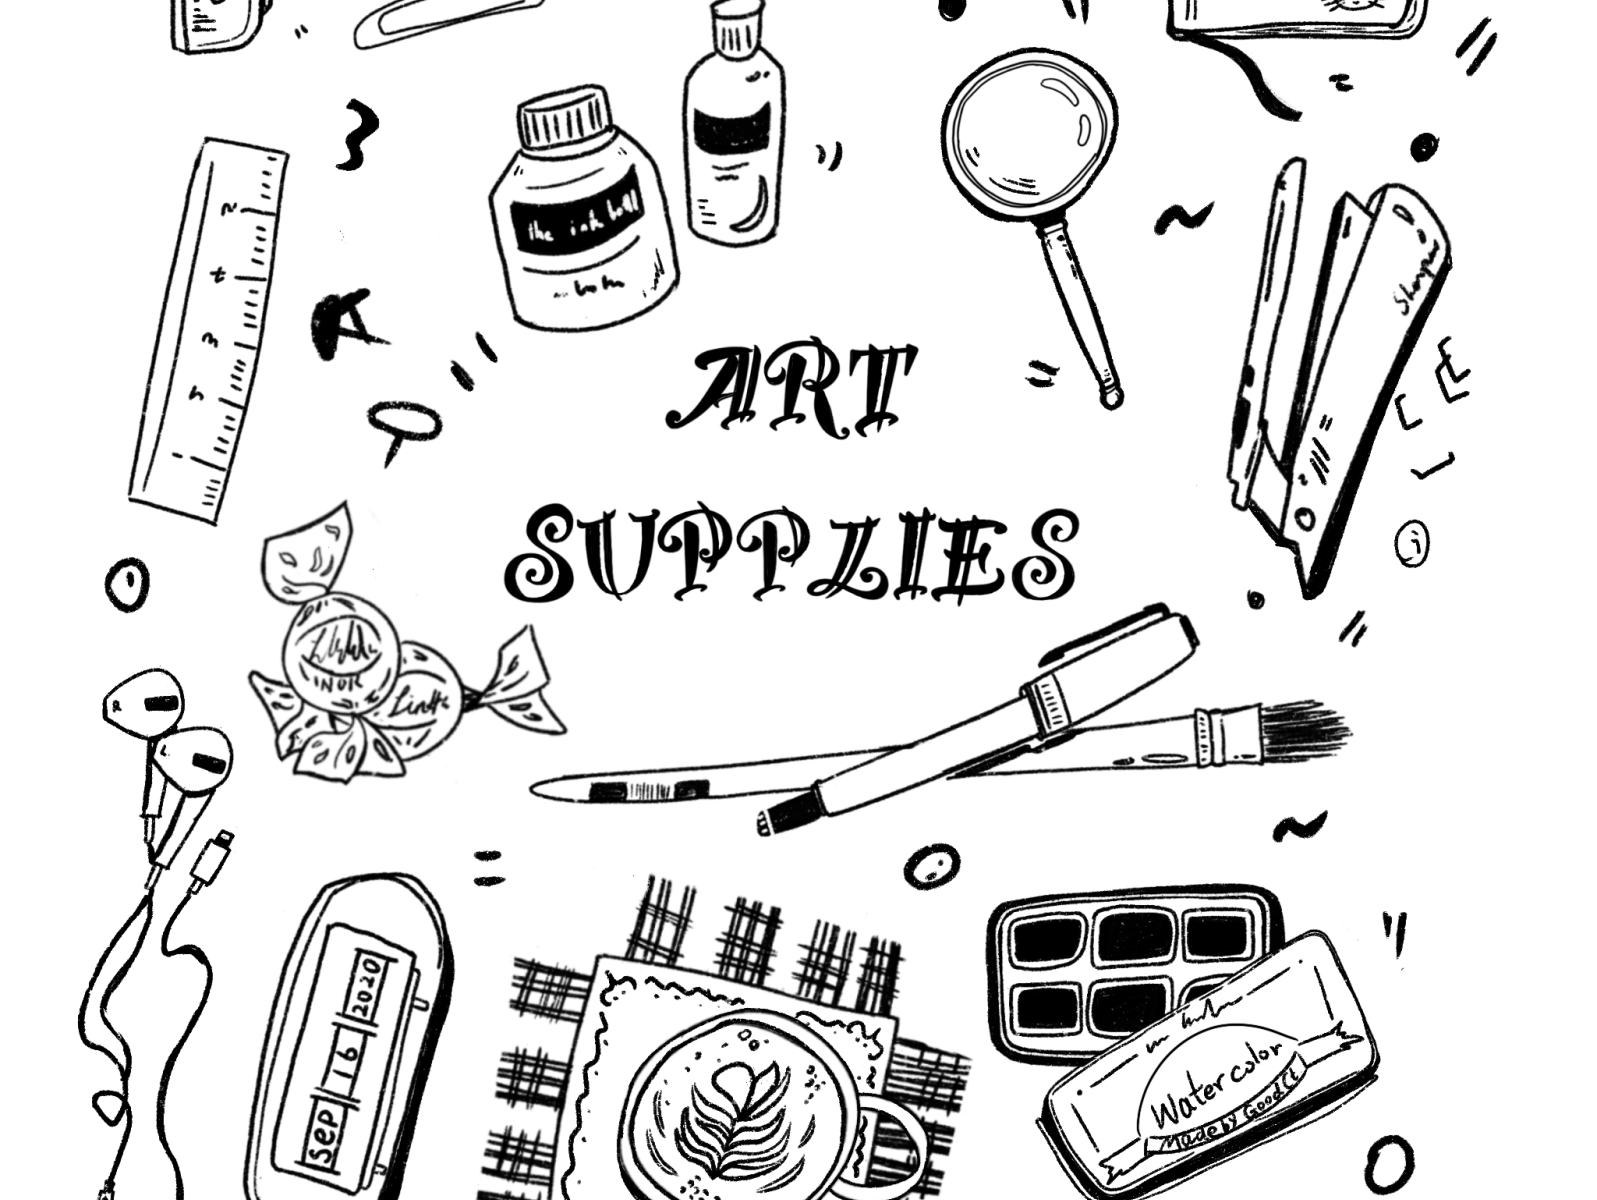 Art Supplies doodling by Anne.L on Dribbble